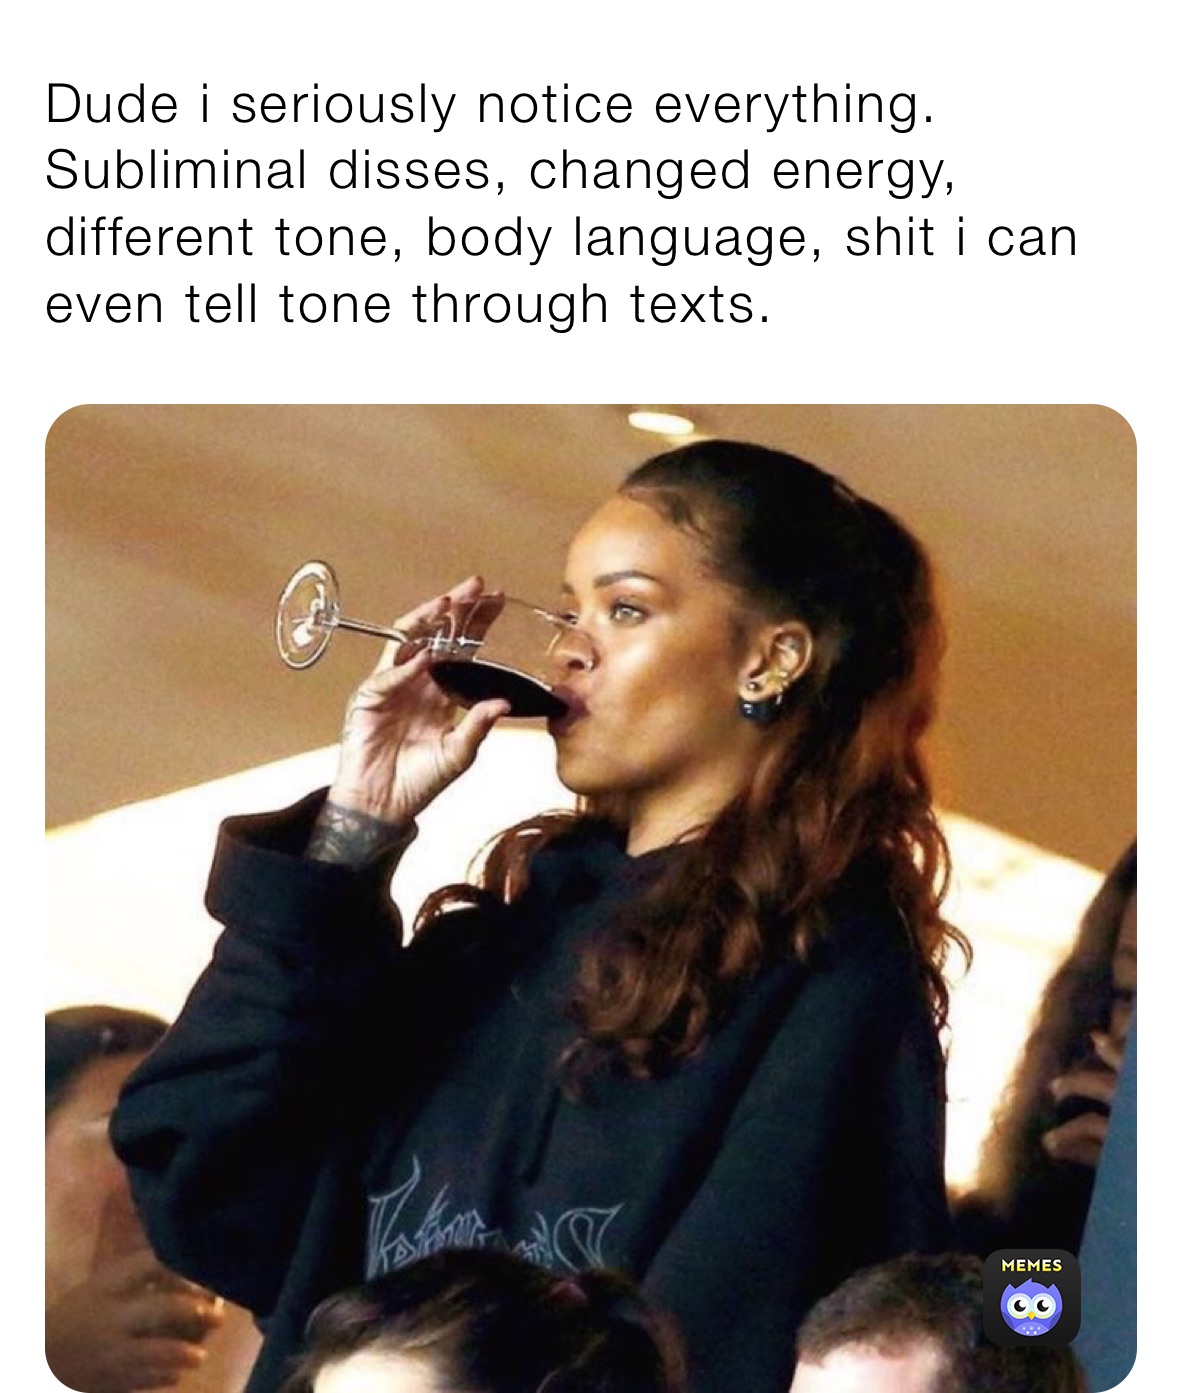 Dude i seriously notice everything.
Subliminal disses, changed energy, different tone, body language, shit i can even tell tone through texts.